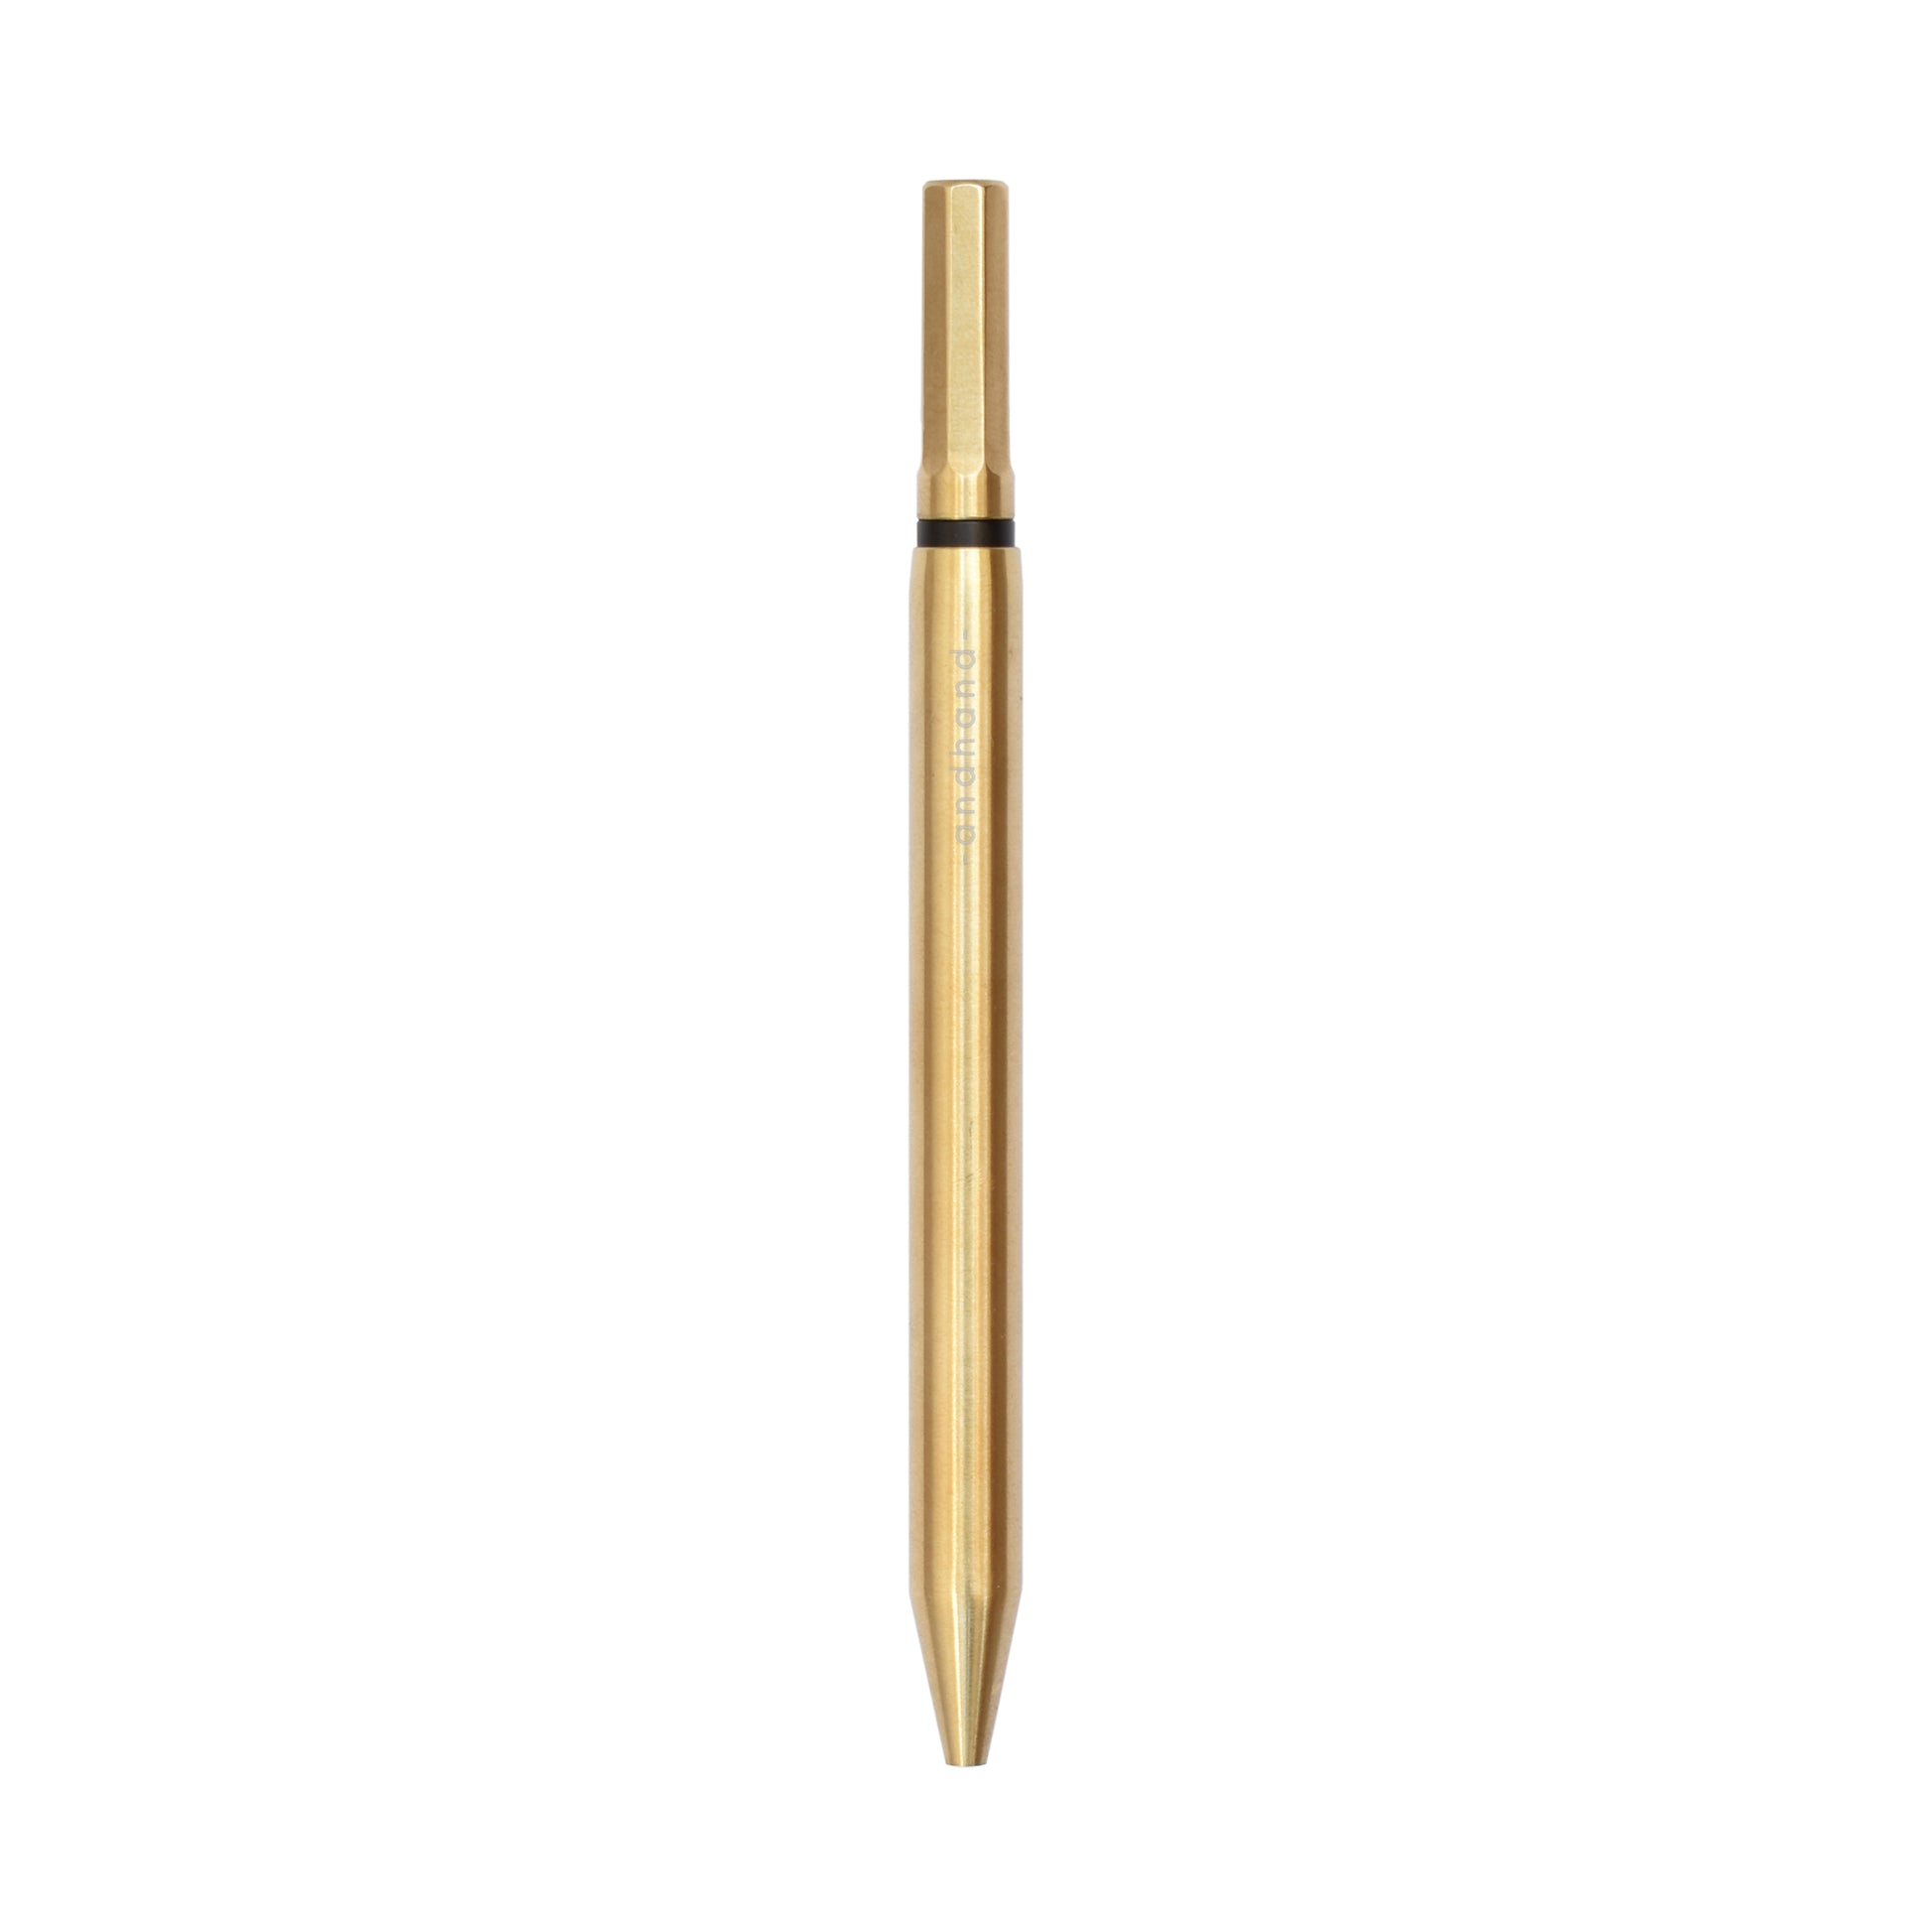 Method pen is a solid brass ballpoint pen from Andhand. An expertly precise writing tool featuring a smooth mechanism and modern minimal design. Amazingly durable and refined.